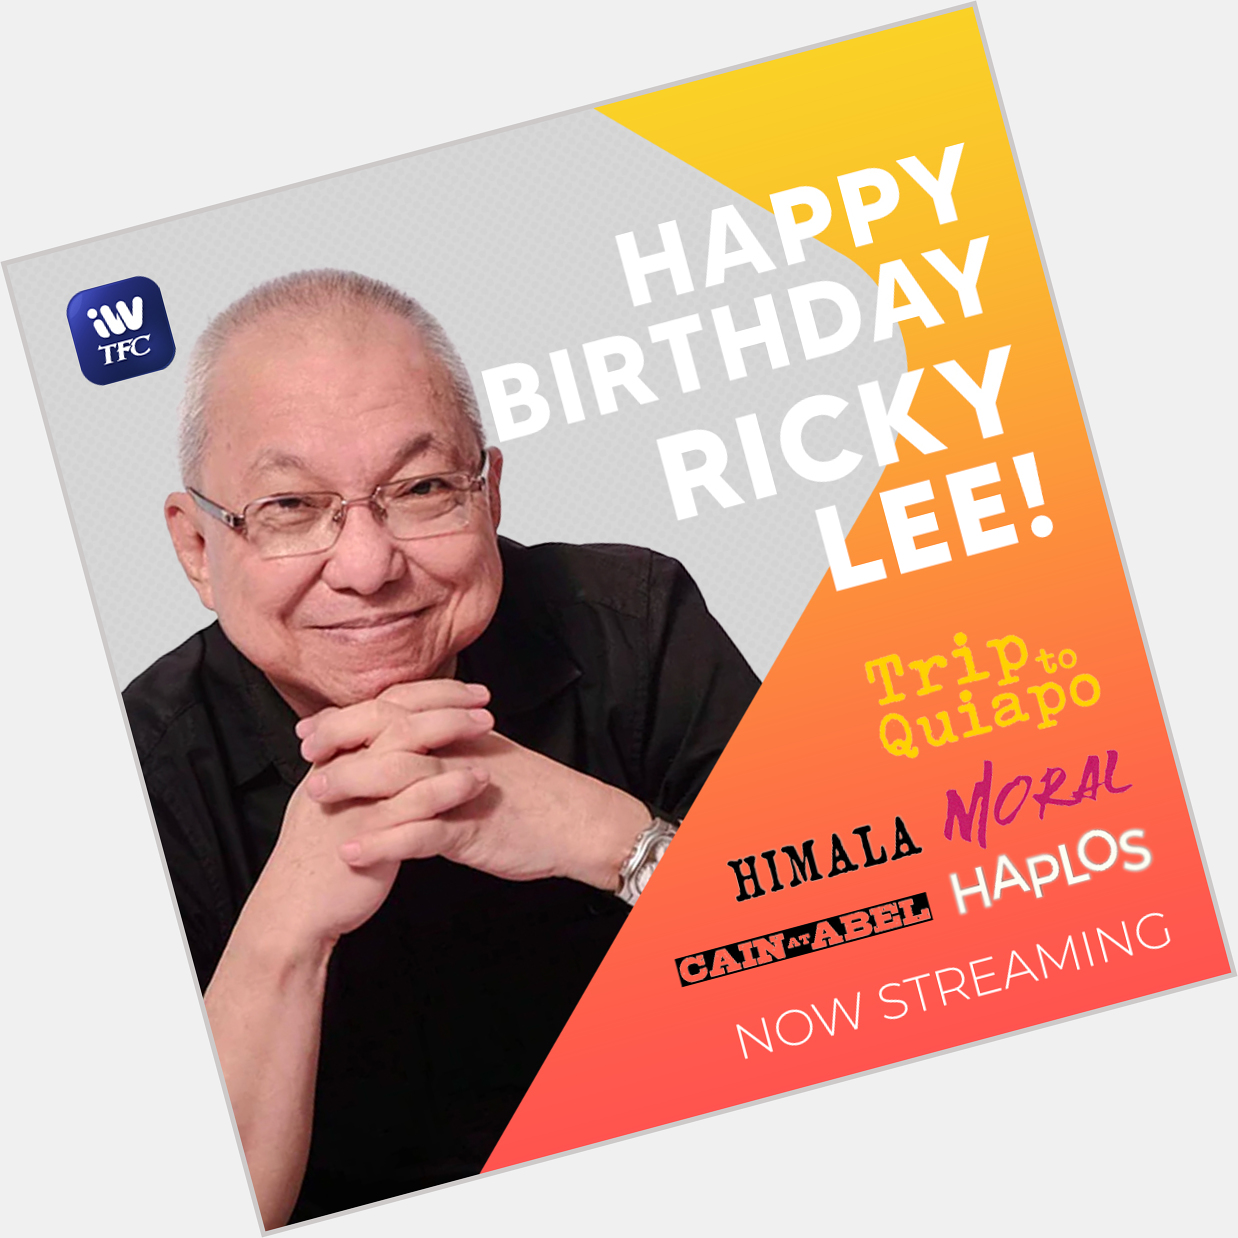 Happy birthday, Sir Ricky Lee!   Watch his shows and movies today on iWantTFC! 